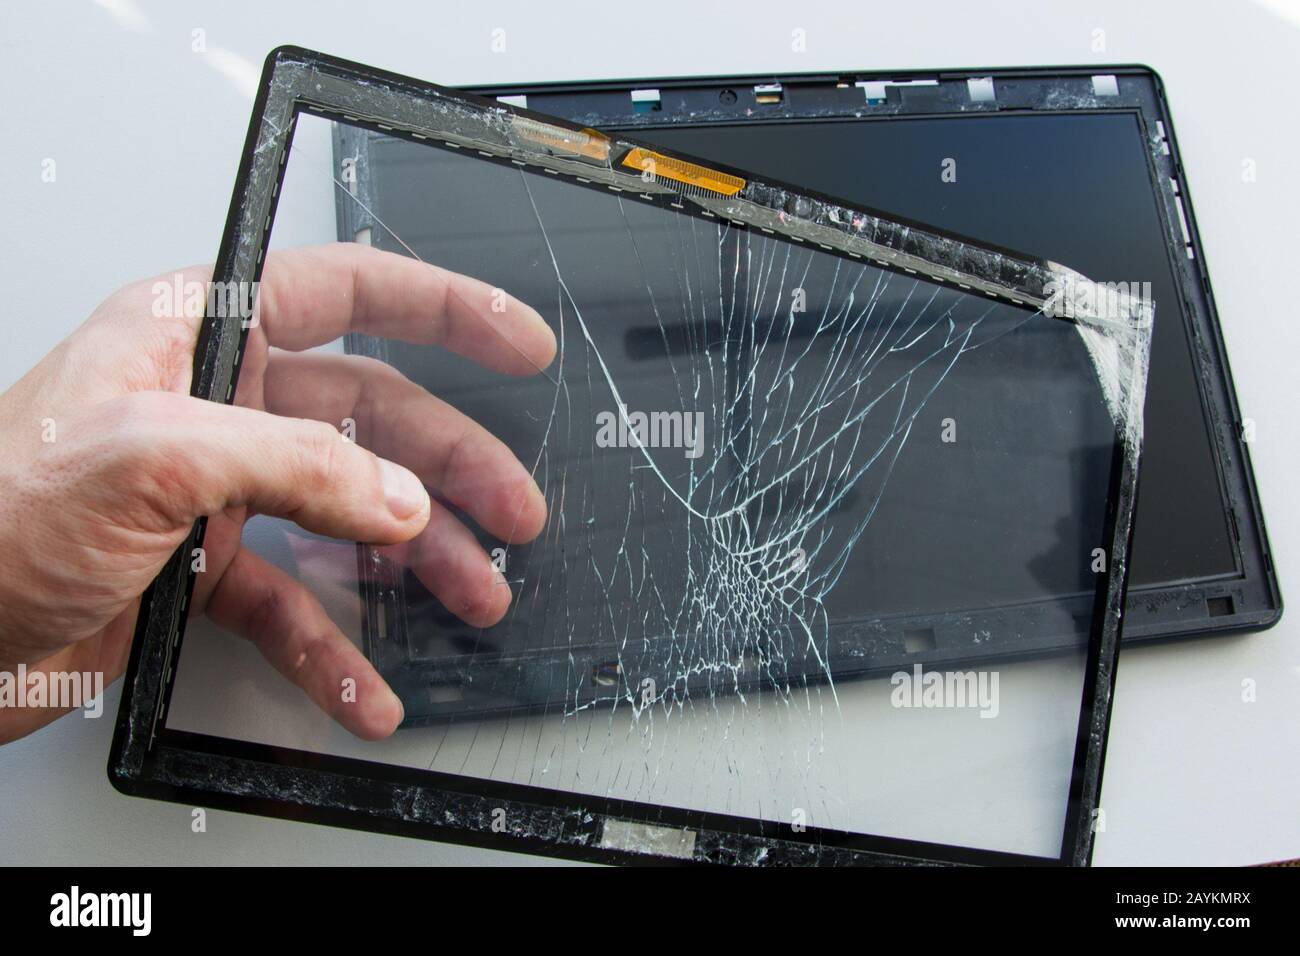 Cracked or bleeding screen on Galaxy phone or tablet